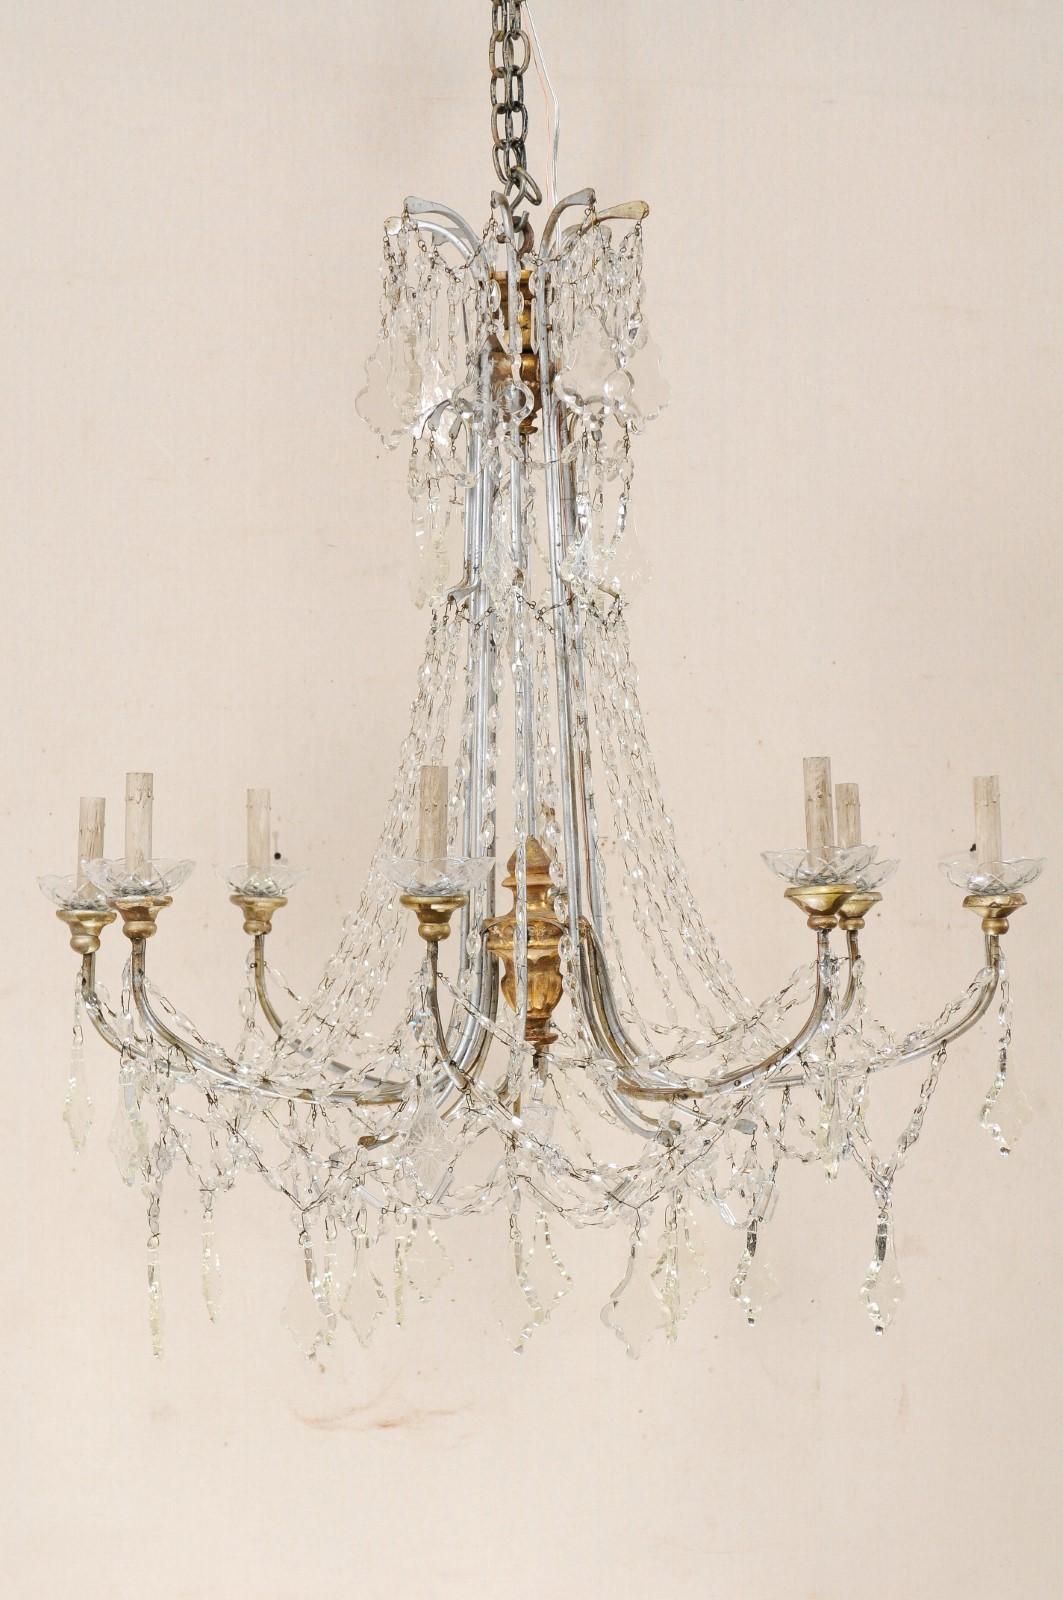 Beaded Italian Crystal Eight-Light Chandelier w/ Two-Tiered Waterfall Top, Mid-20th C.